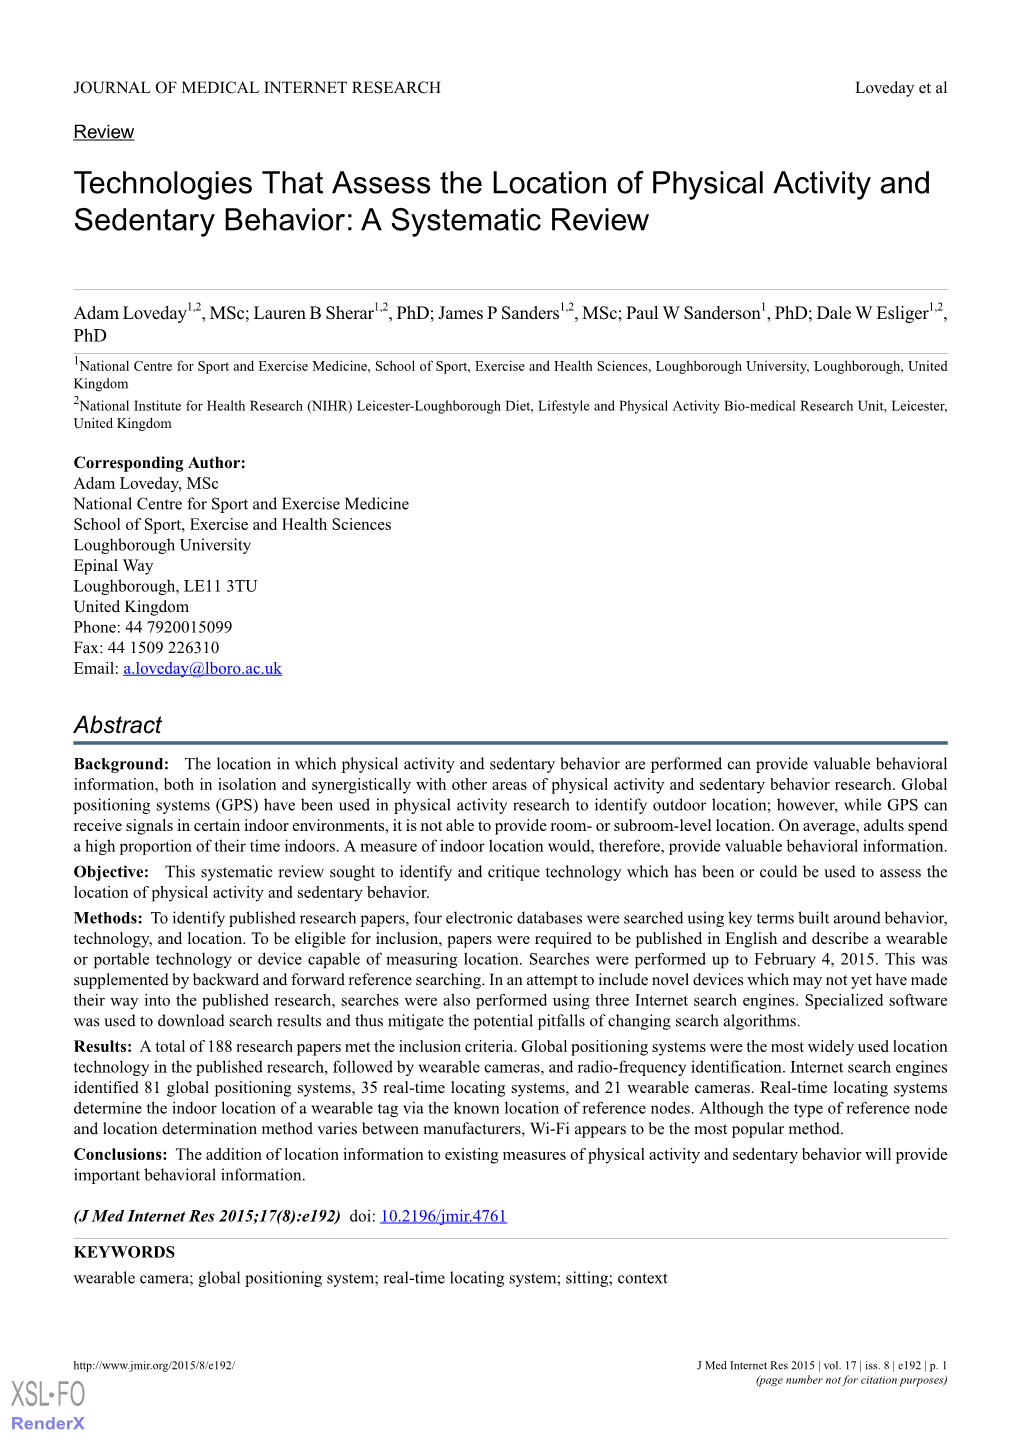 Technologies That Assess the Location of Physical Activity and Sedentary Behavior: a Systematic Review